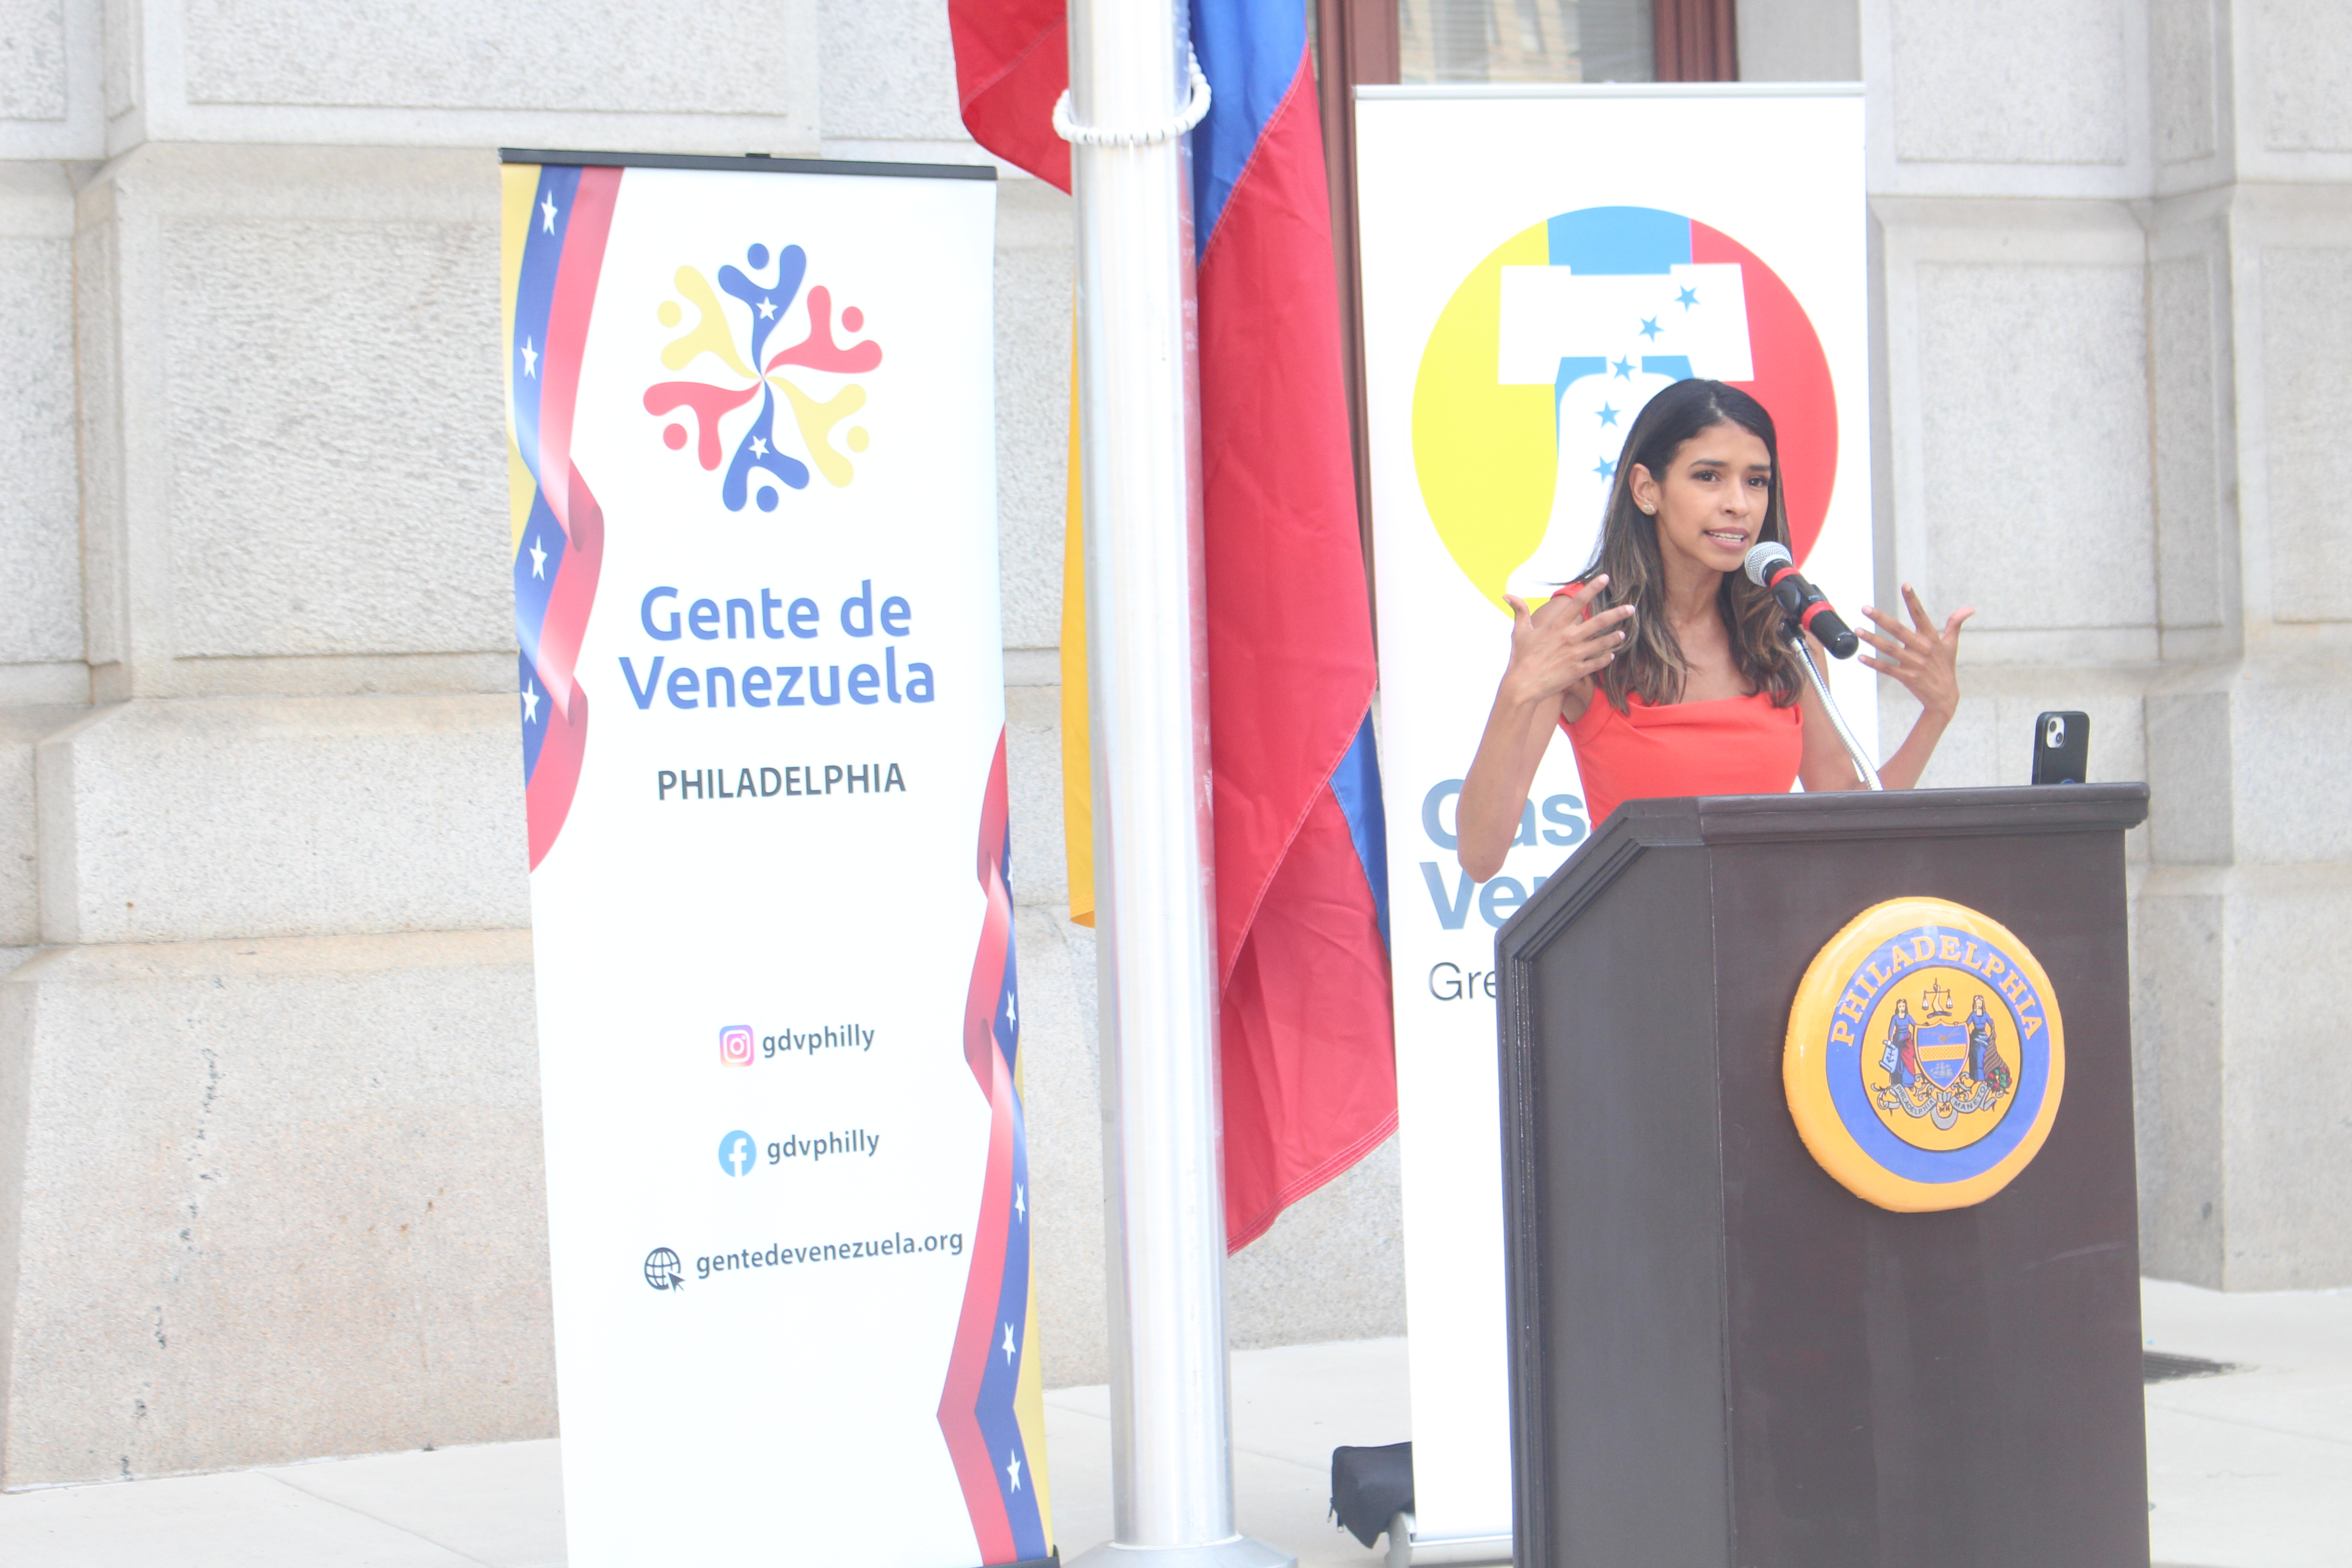 Isabel Sánchez hosted the Venezuelan Flag raising event for the second year in a row. Photo: Jensen Toussaint/AL DÍA News.